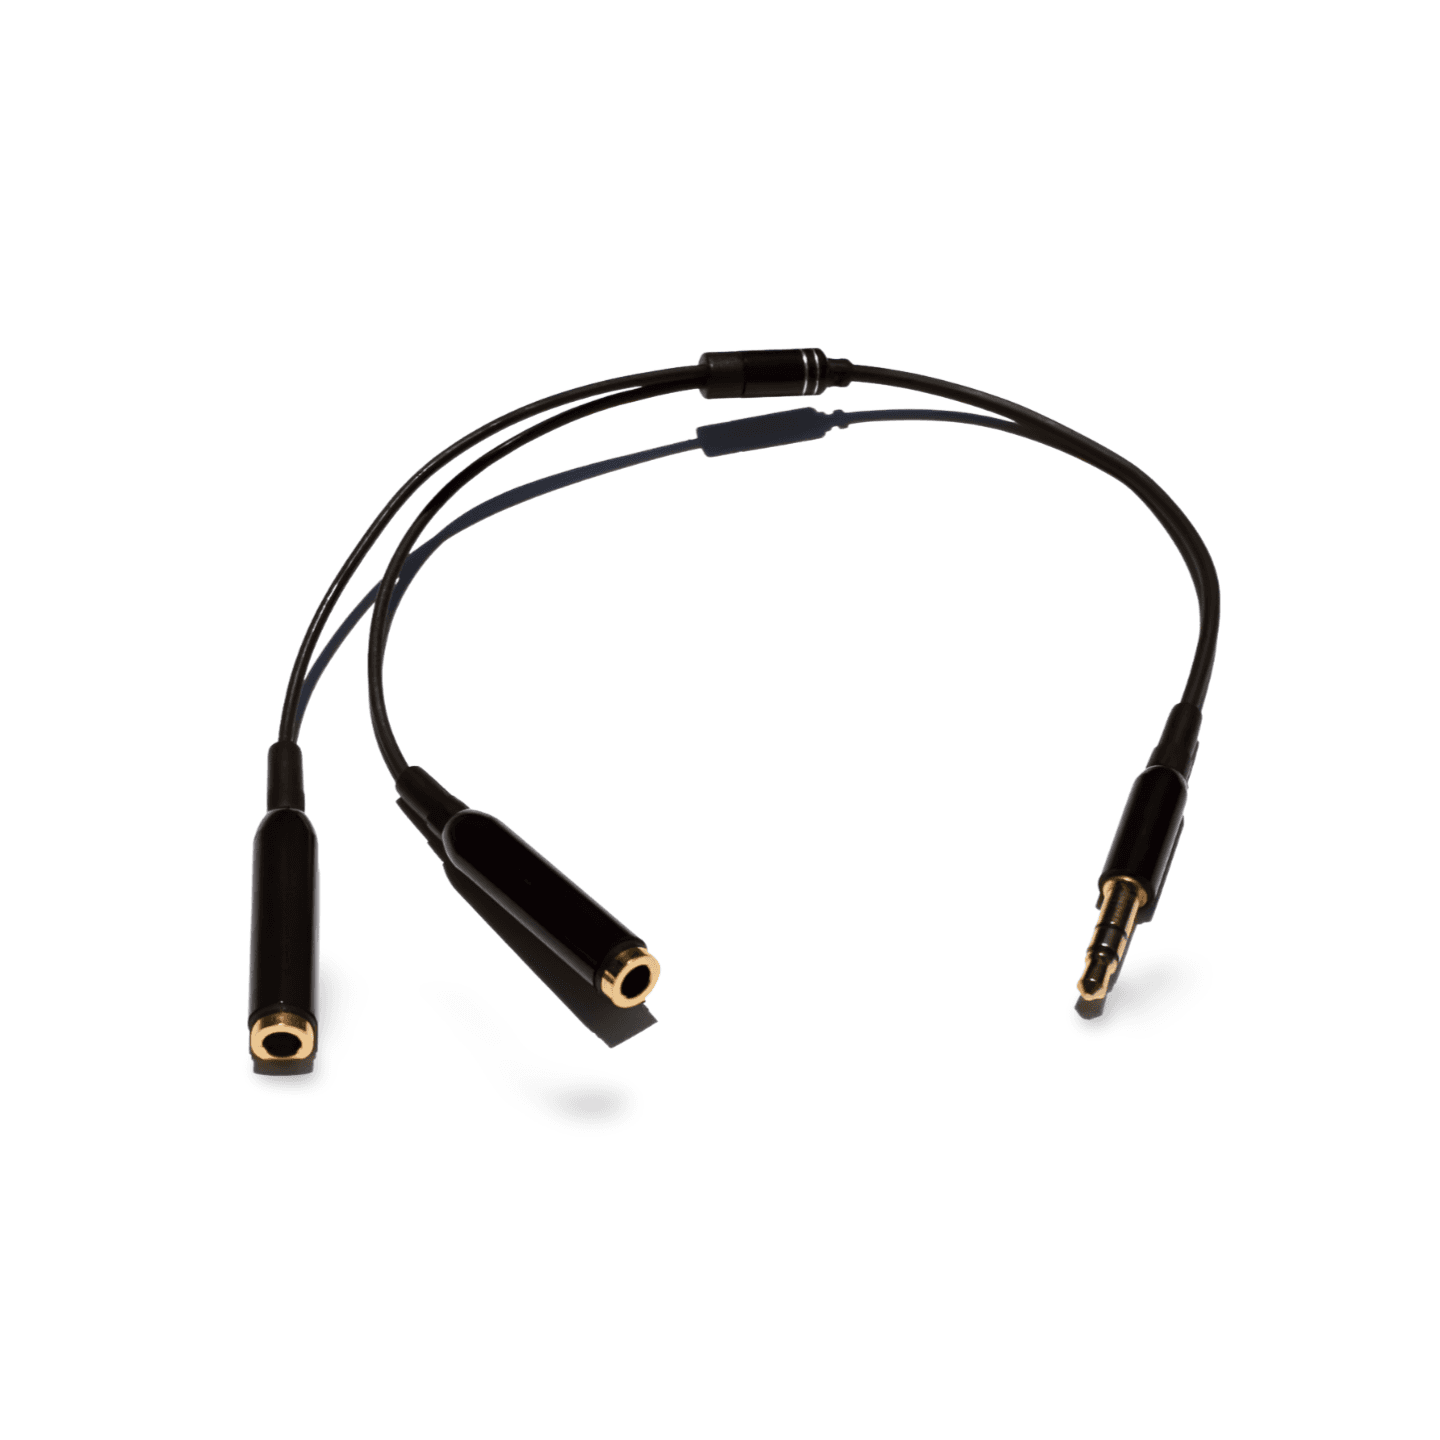 6in Stereo Splitter Cable 3.5mm Male to Dual Female black